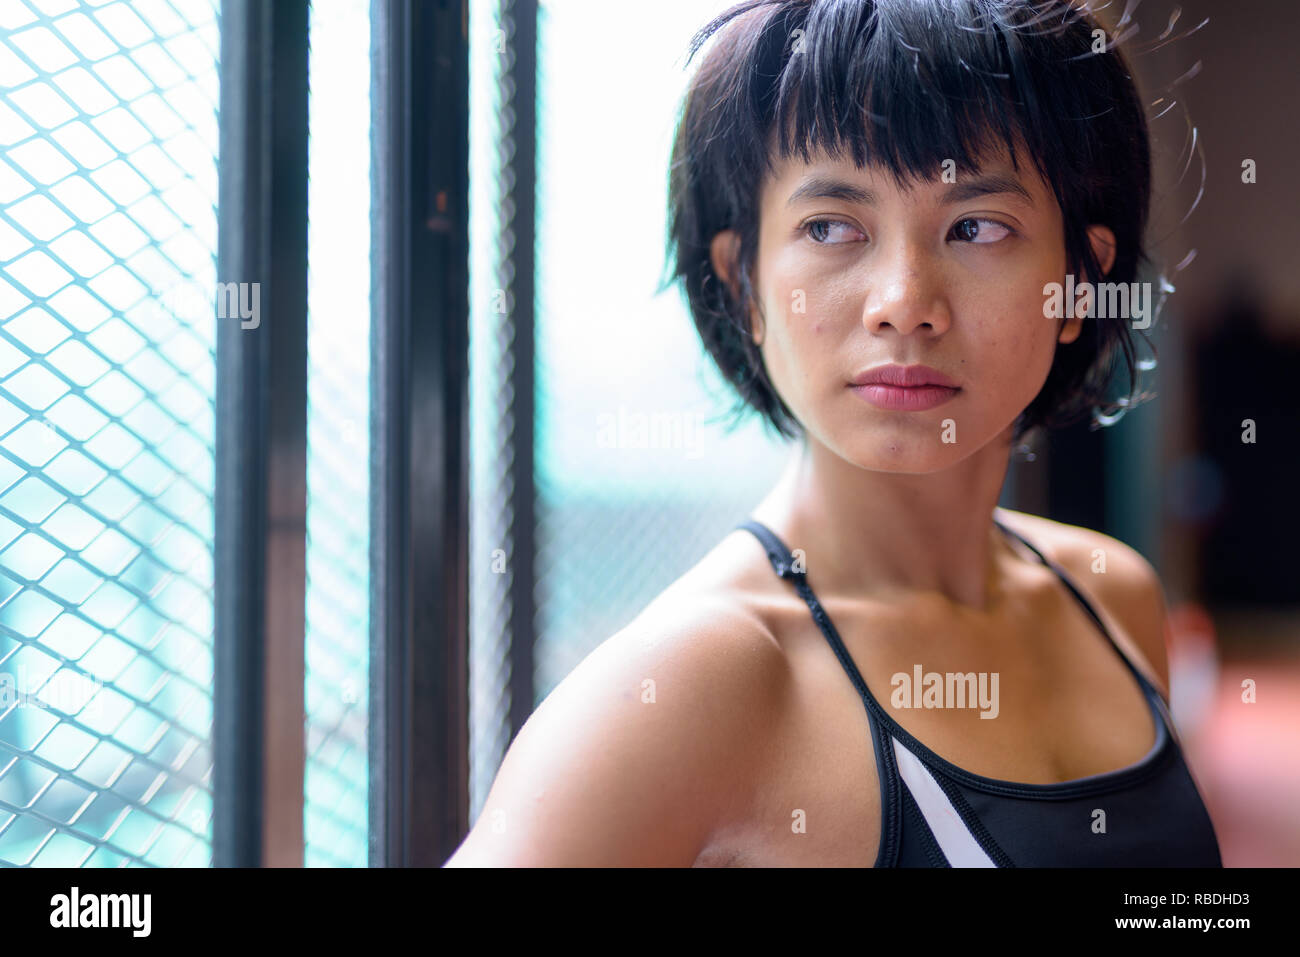 Face of young beautiful Asian woman thinking at the gym Stock Photo